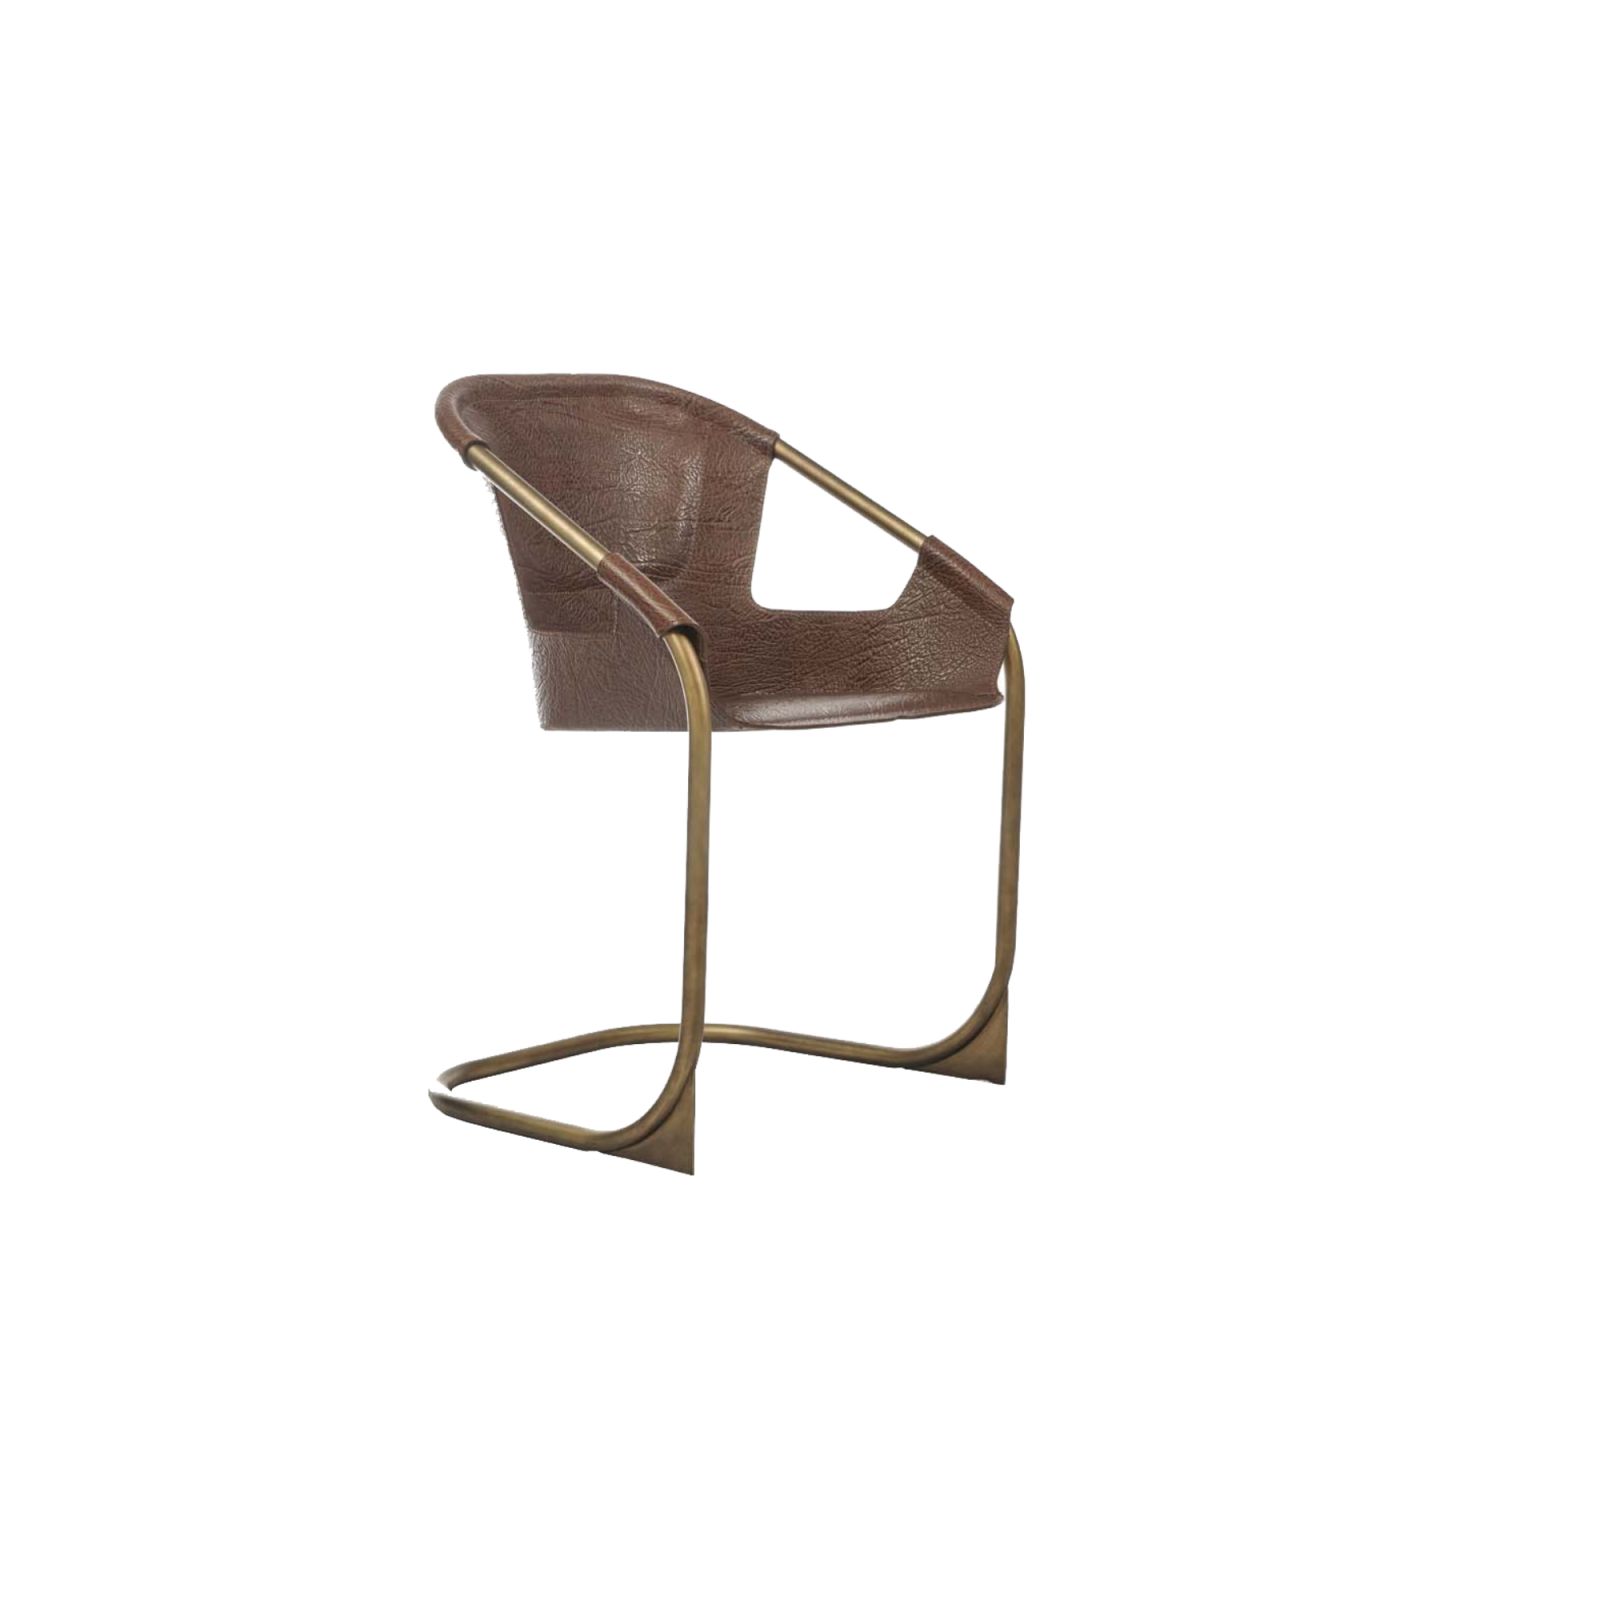 Zahir chair made of aged brass legs and brown leather in front of a white background